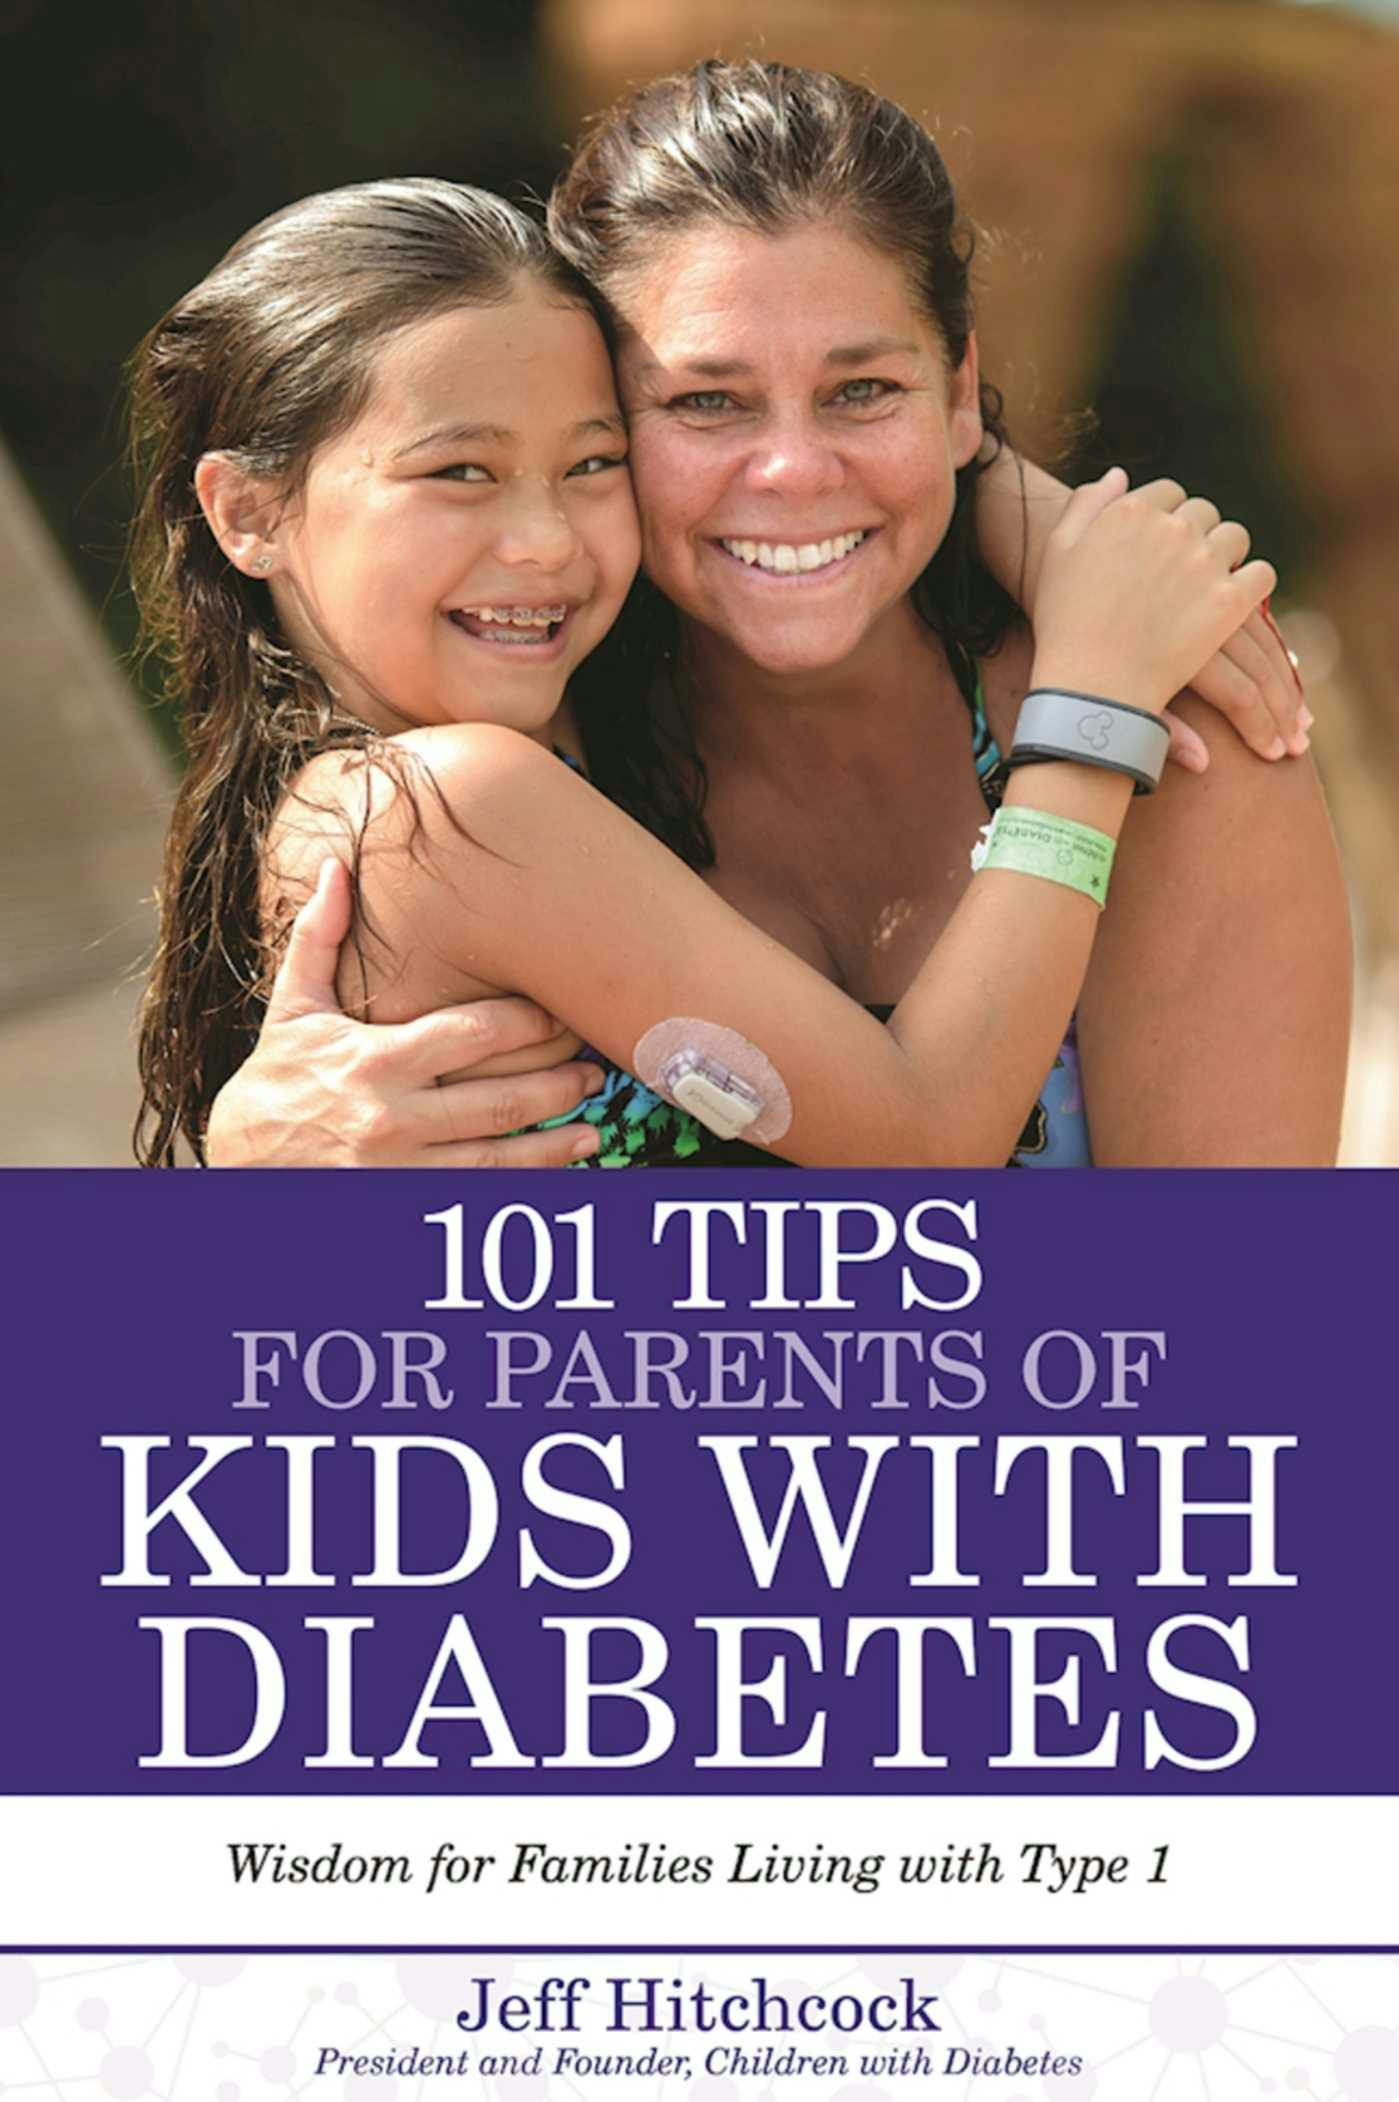 101 Tips for Parents of Kids with Diabetes: Wisdom for Families Living With Type 1 - Jeff Hitchcock